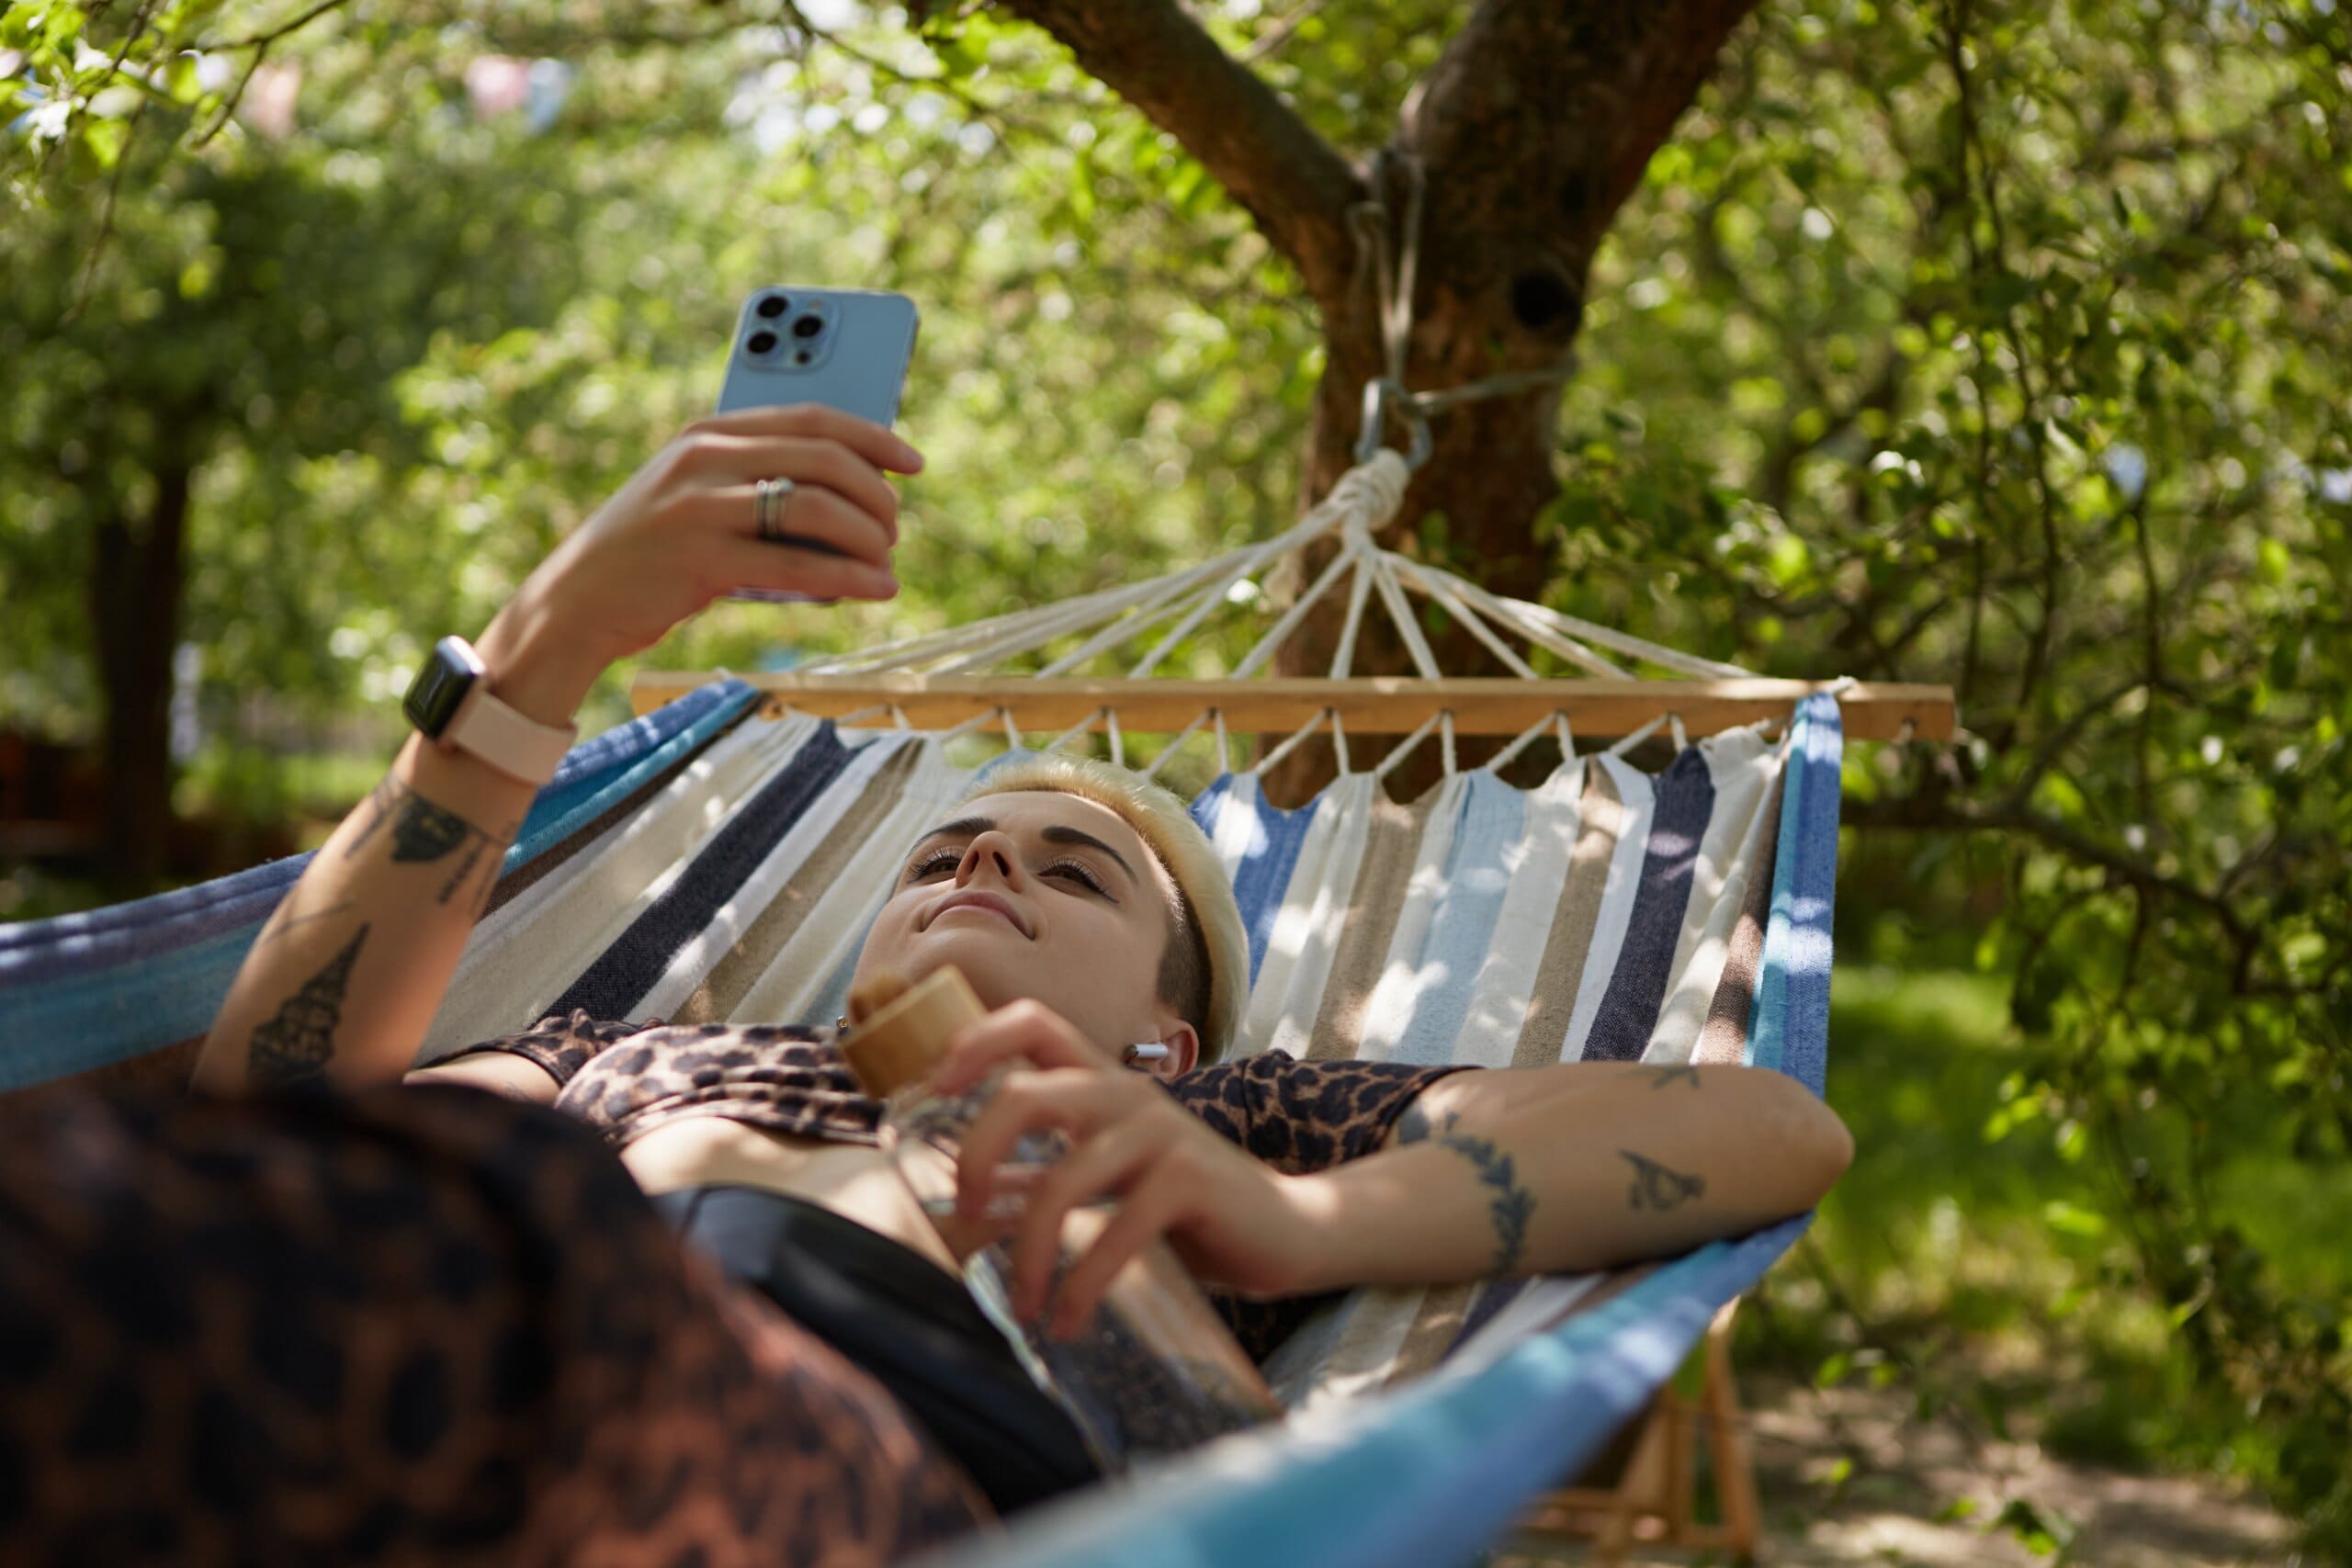 Young woman with tattoos on her phone in a garden hammock.